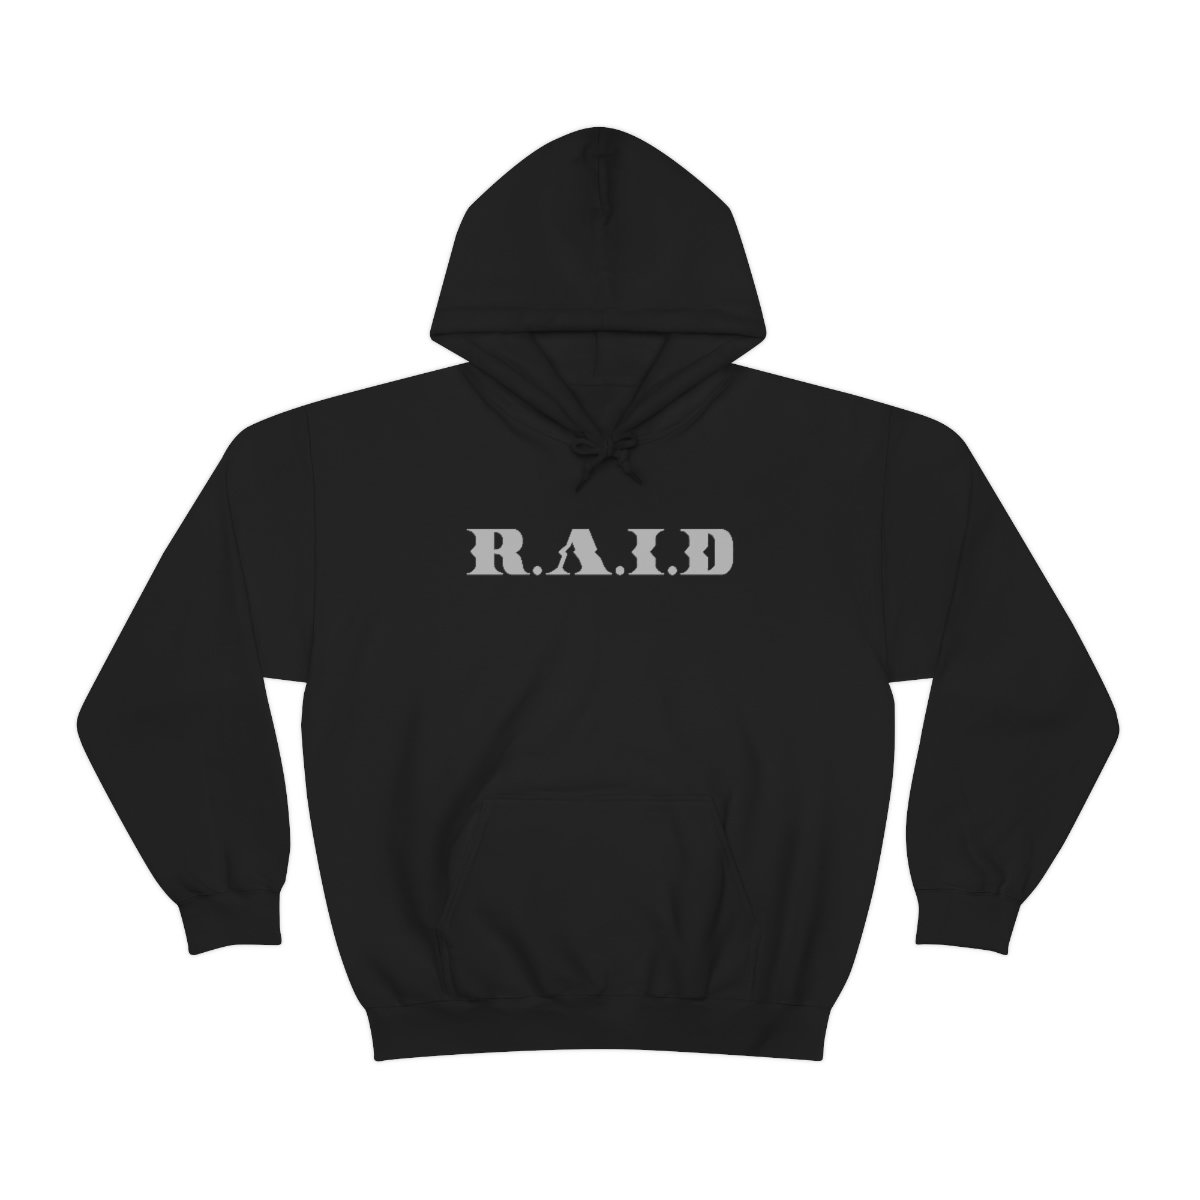 R.A.I.D – Imperium Pullover Hooded Sweatshirt